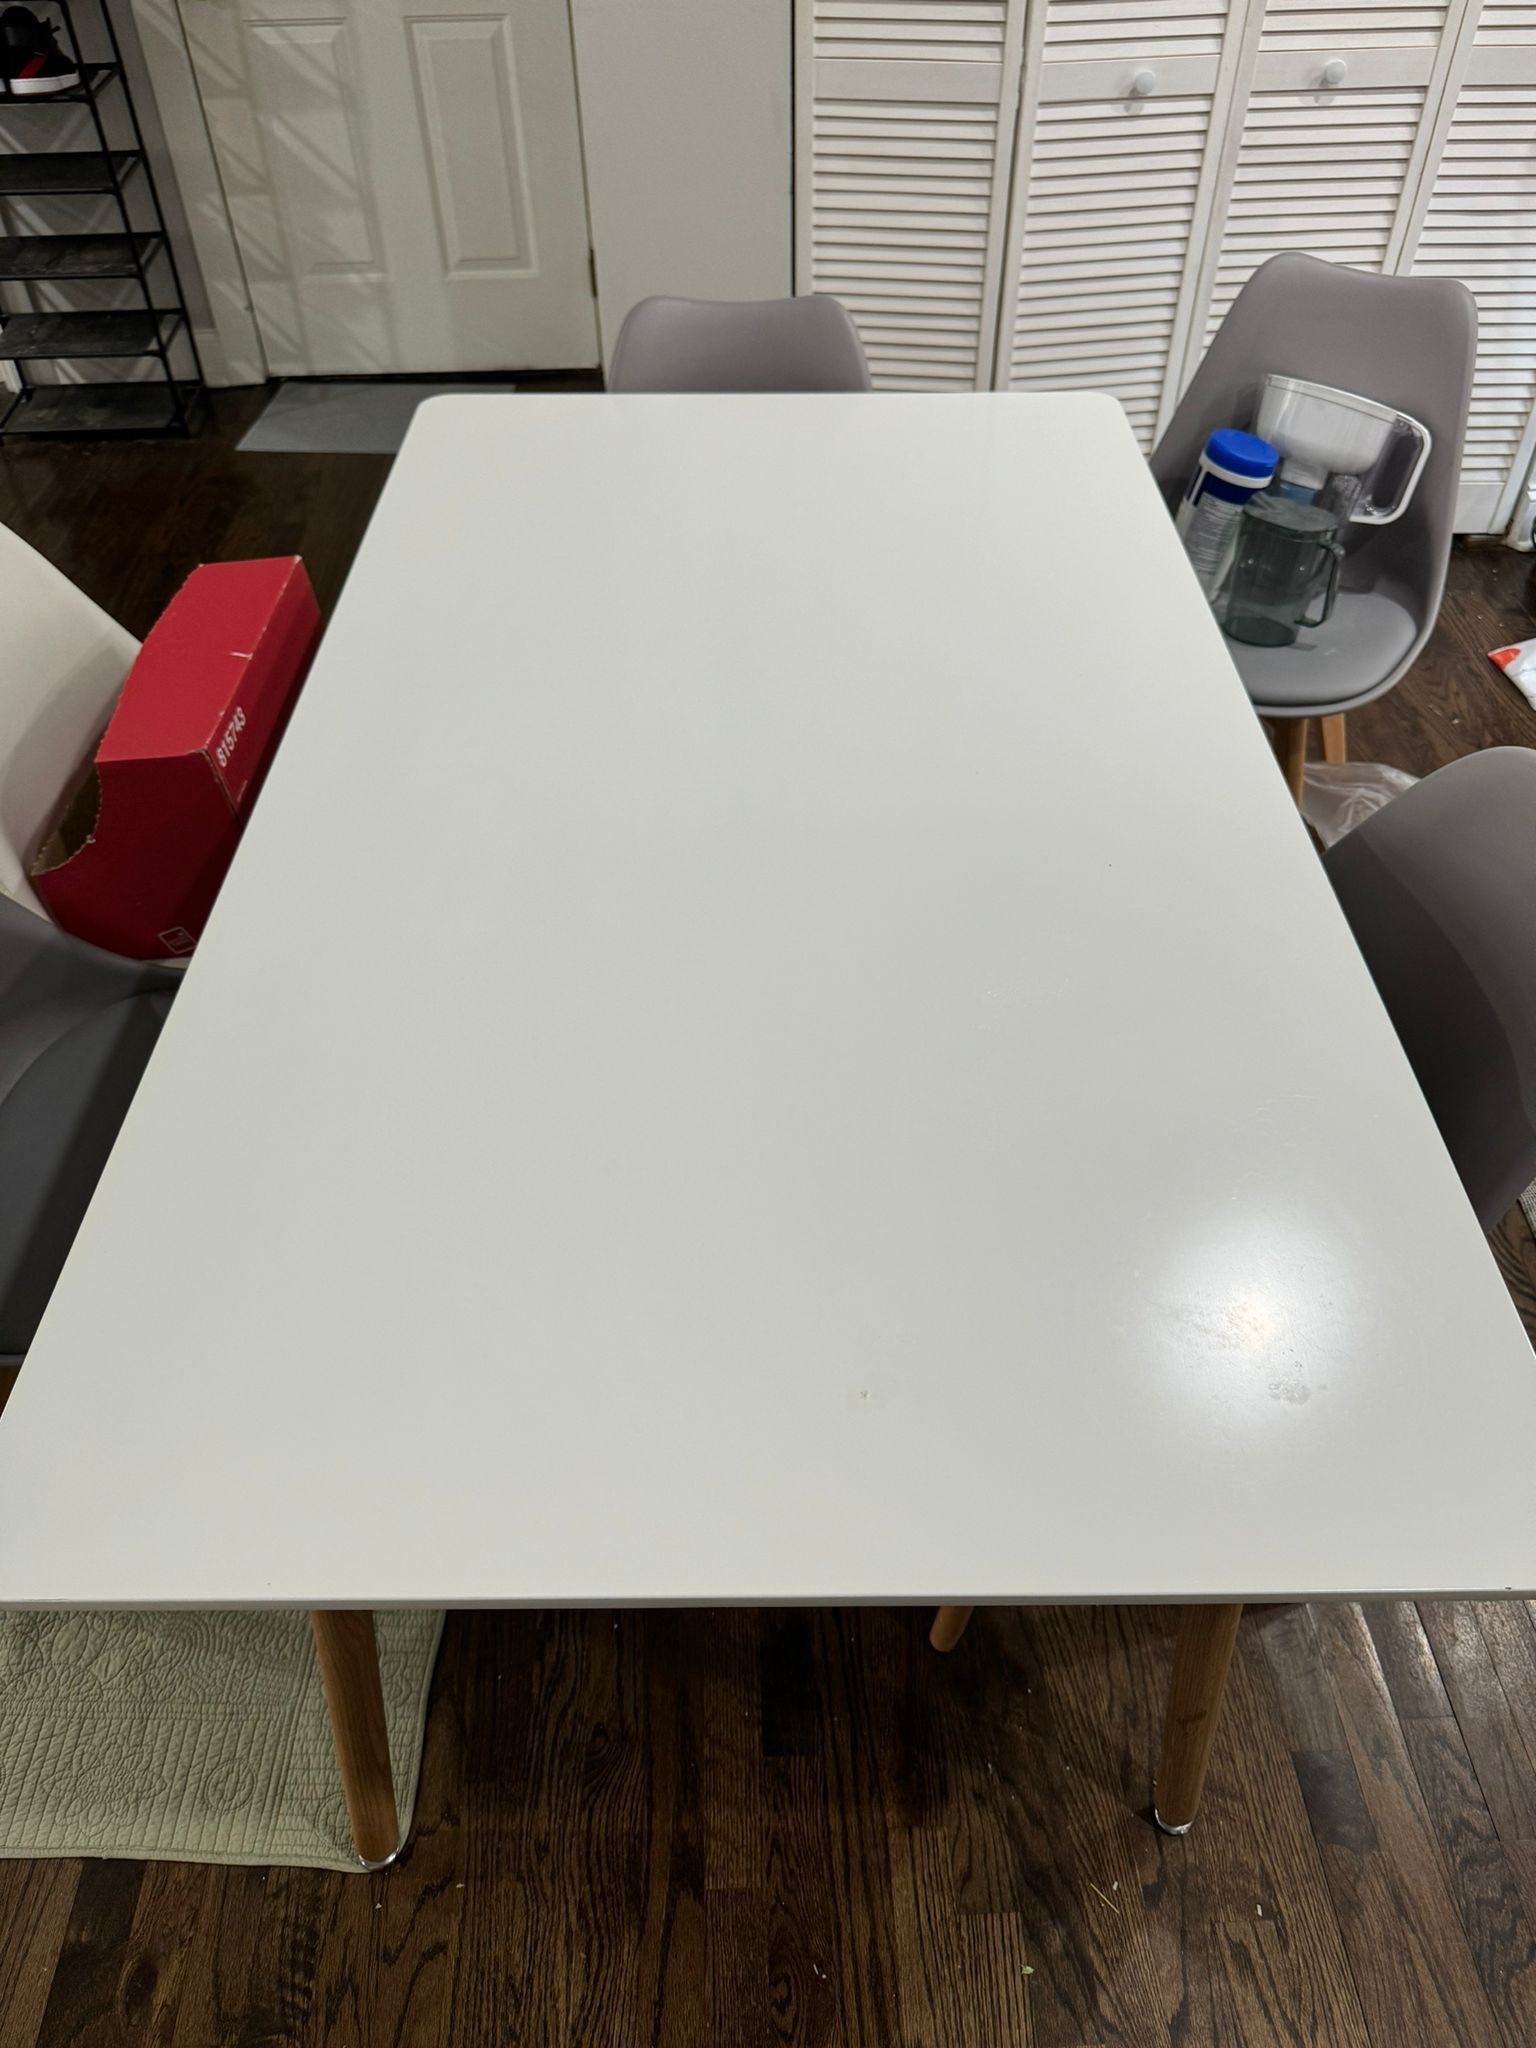 Ikea Dining Table